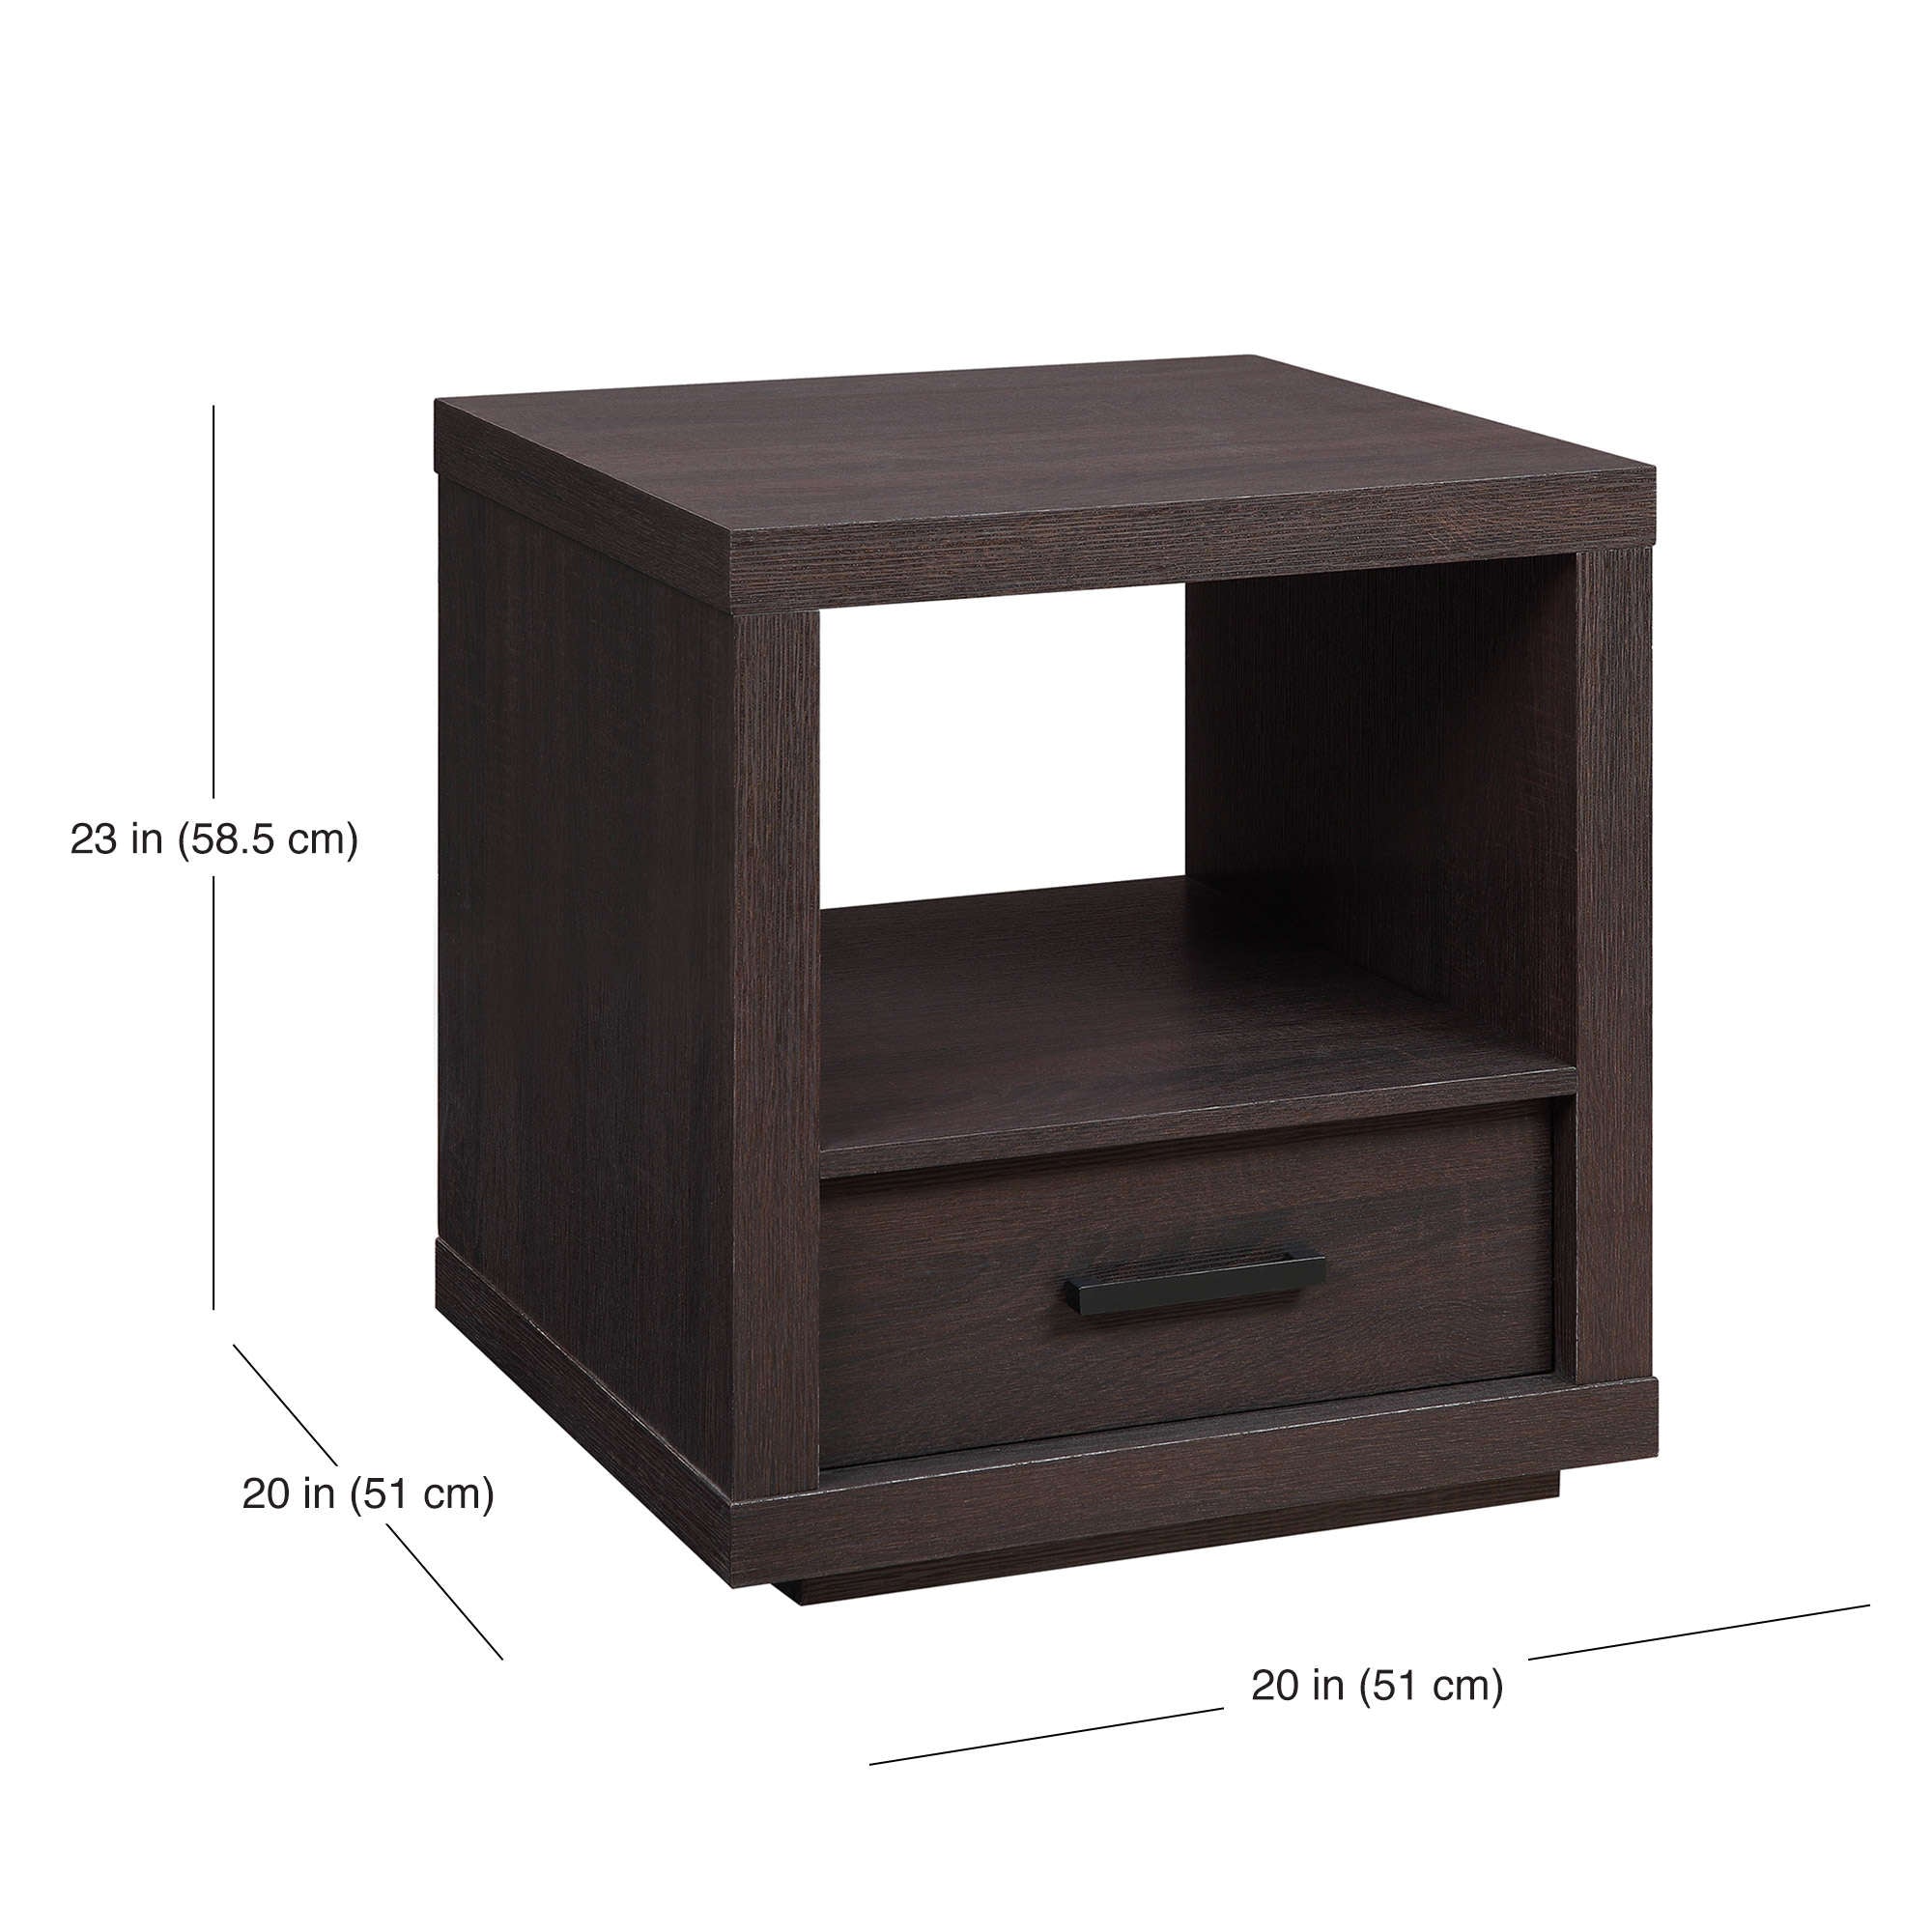 Espresso End Table With Drawer Contemporary Table Living Room Office Bedroom NEW-Wood End Tables-AULEY